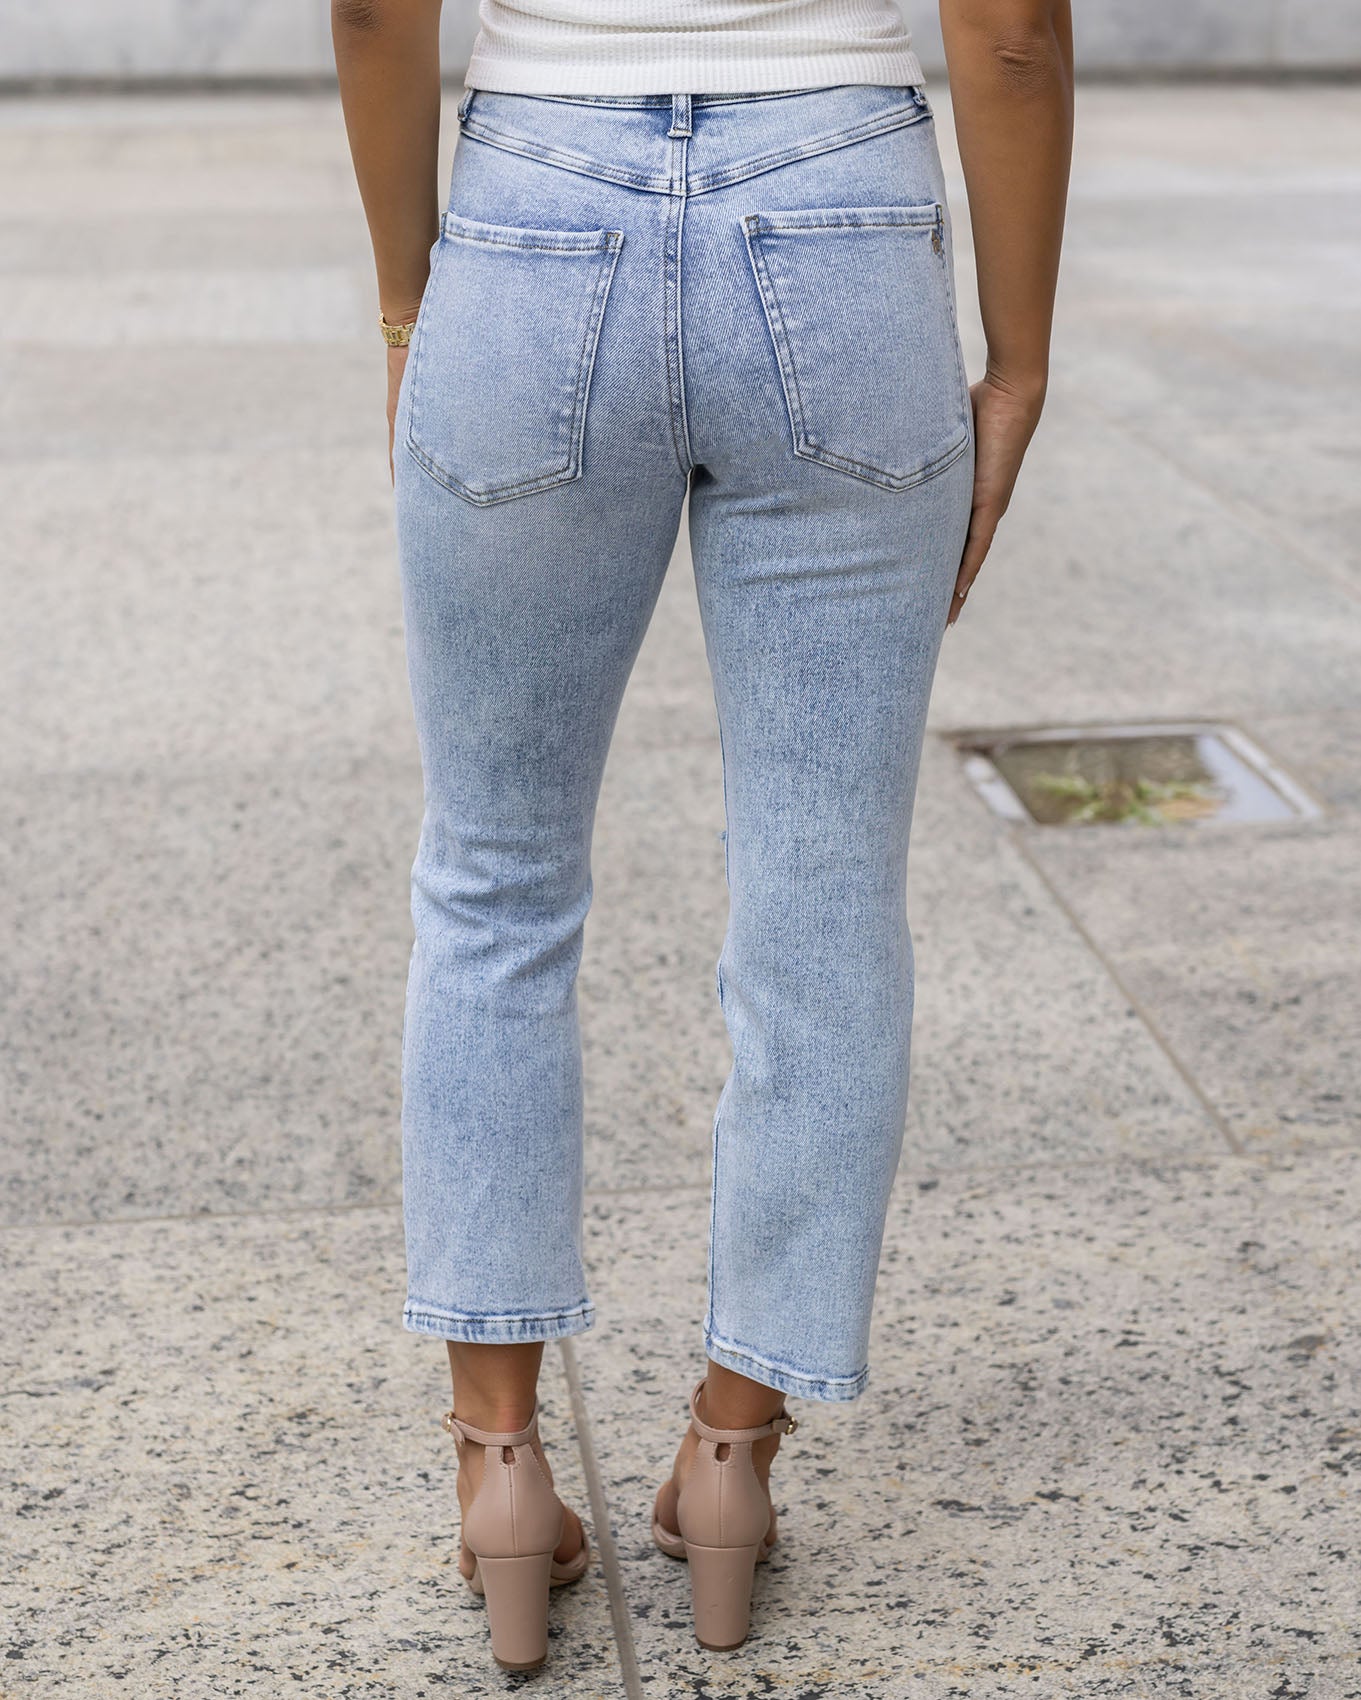 Premium Denim High Waisted Mom Jeans in Distressed Light Mid-Wash ...